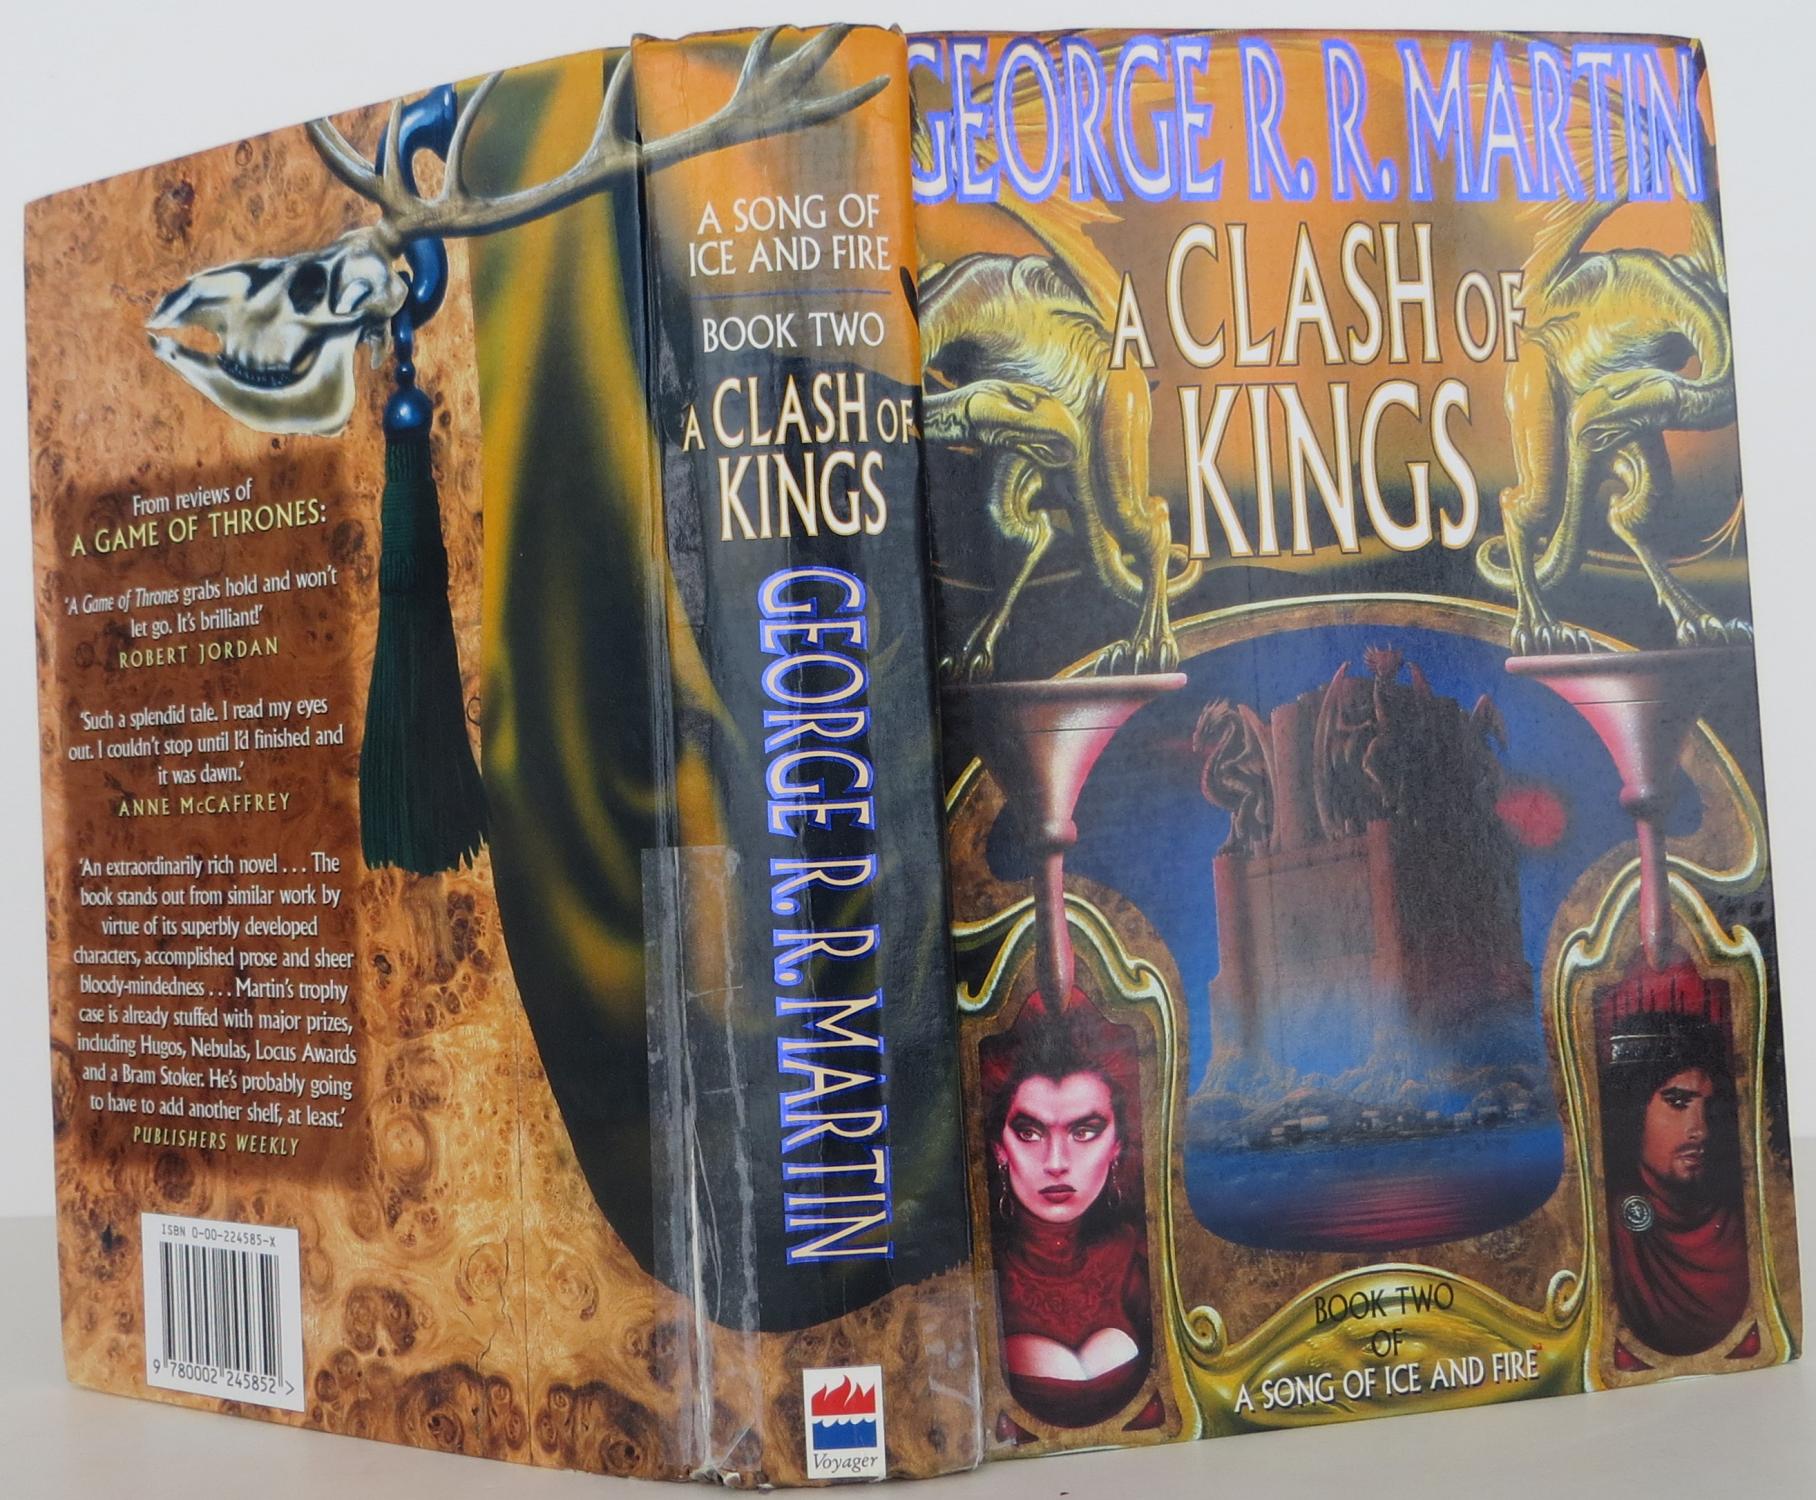 A Clash of Kings A Song of Ice and Fire, Book 2, George R. R. Martin